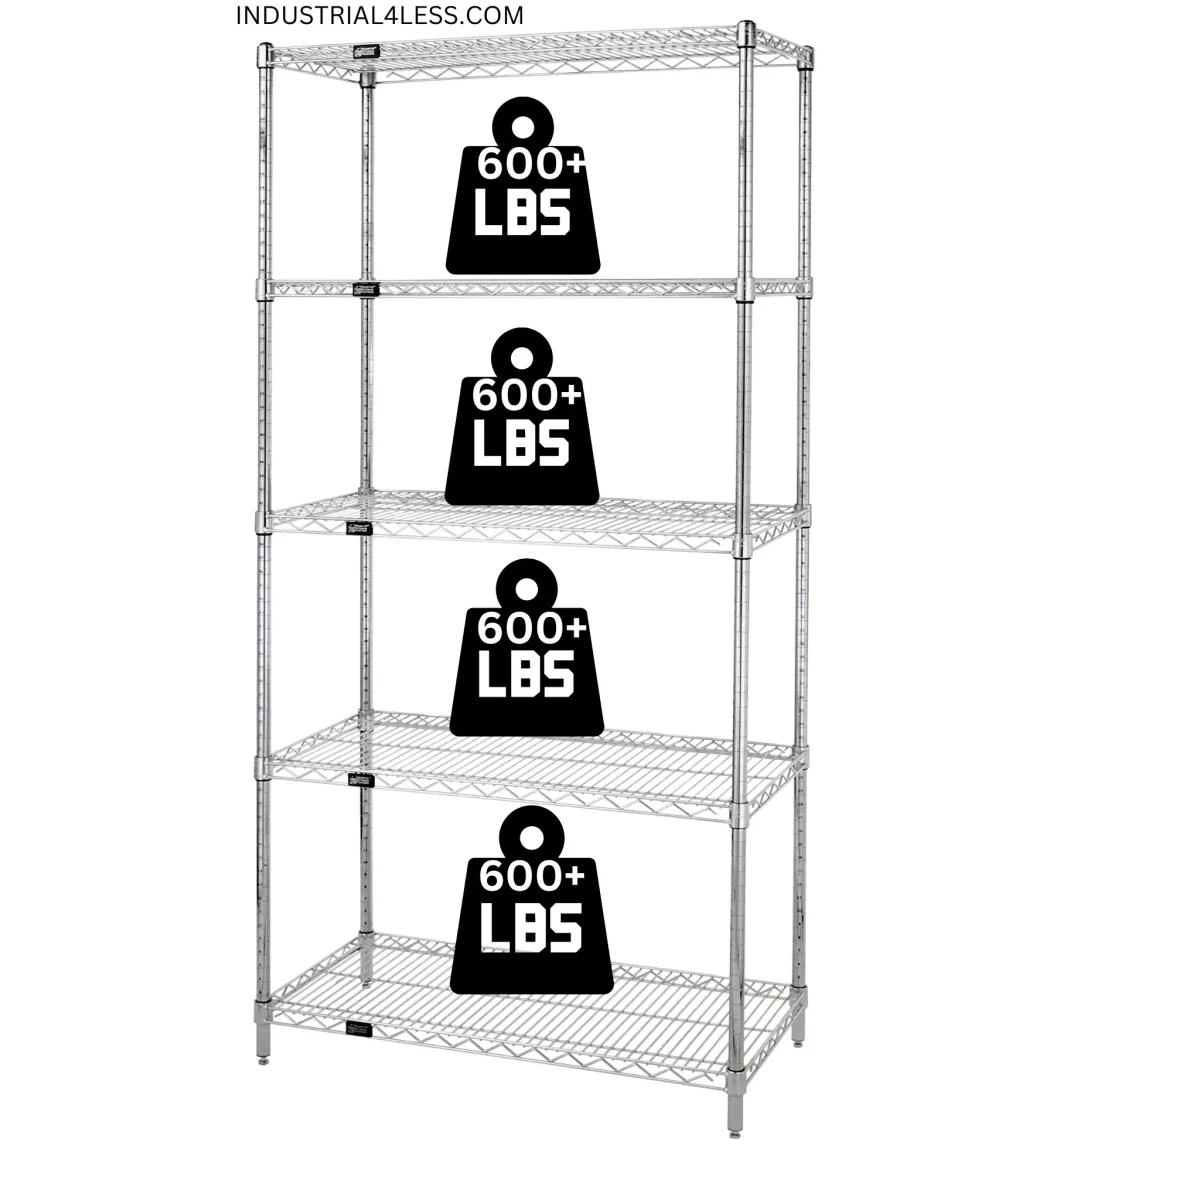 21" x 24" Stainless Steel Wire Shelving Unit - Industrial 4 Less - 21245S-5